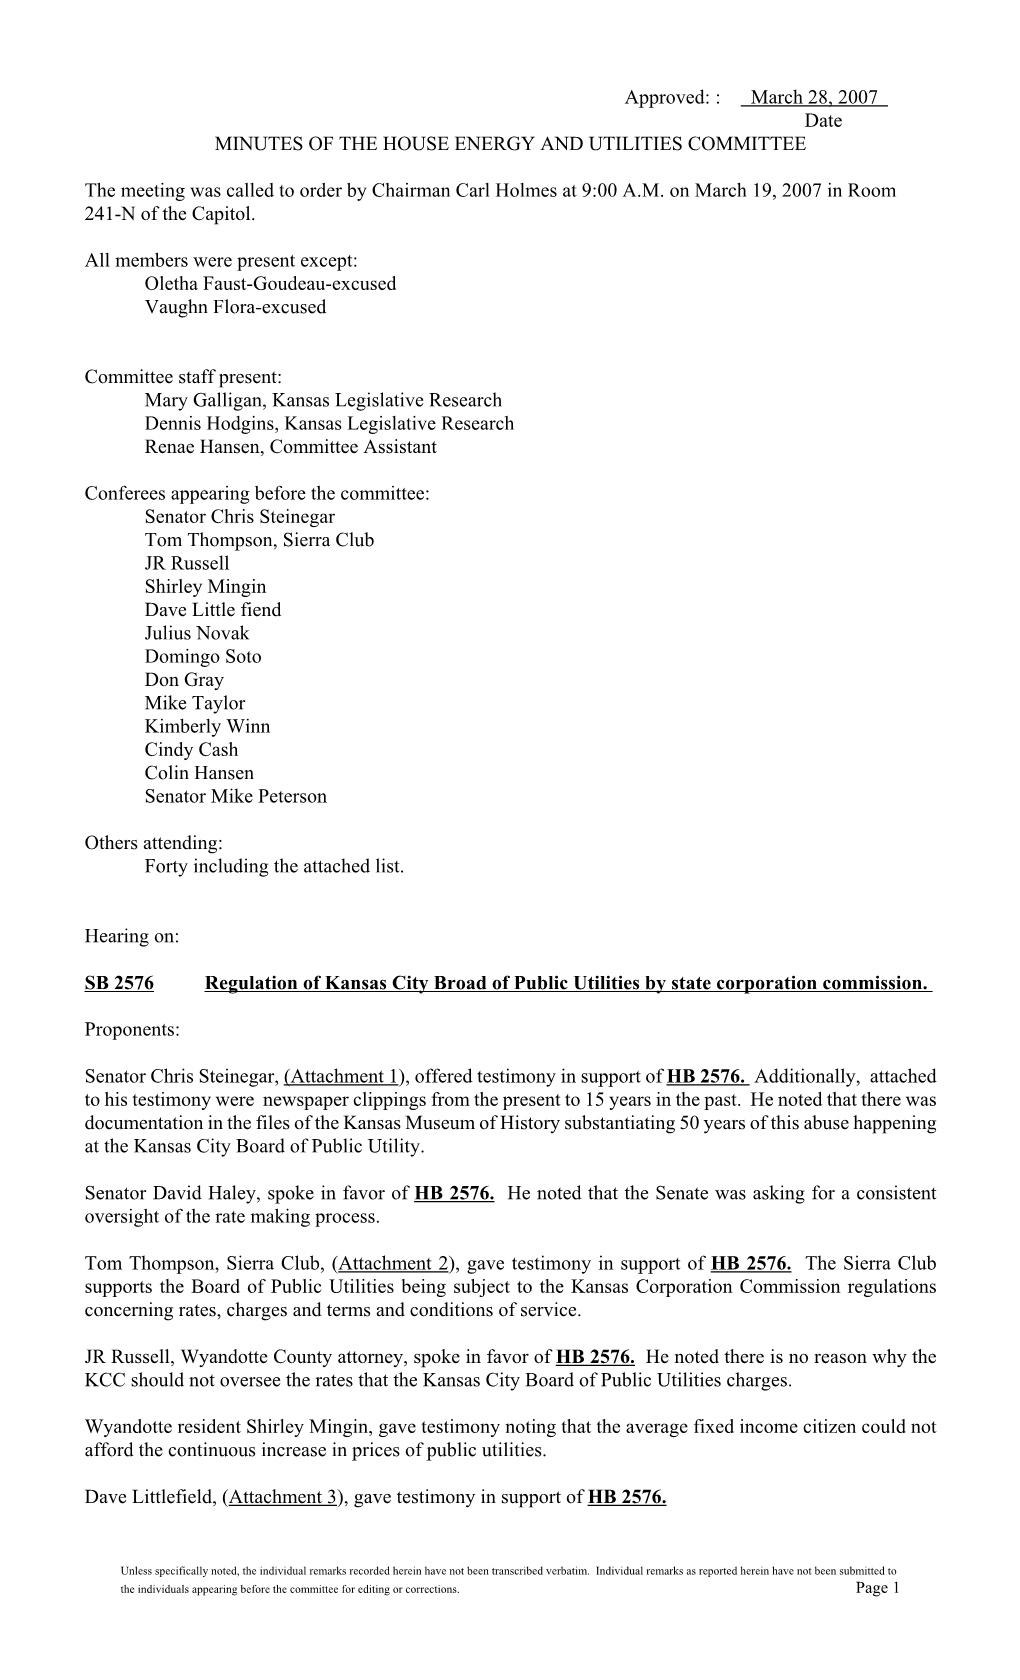 M:\Users\Approved Committee Minutes 2007\House Energy